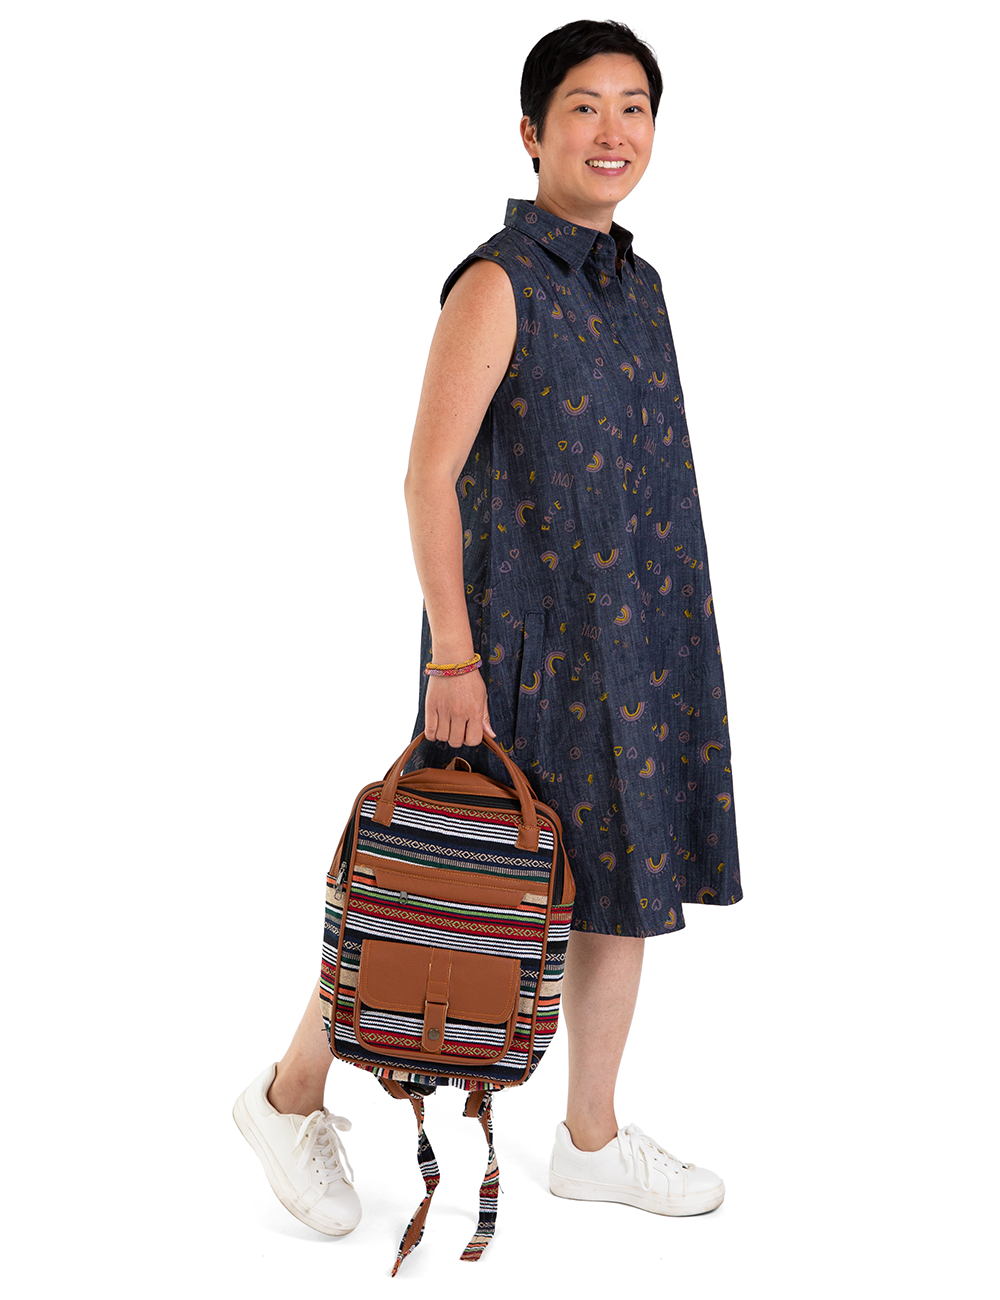 A mid-length dress with a collared neck and now with side pockets! Best suited for cooling down during the hot temps.